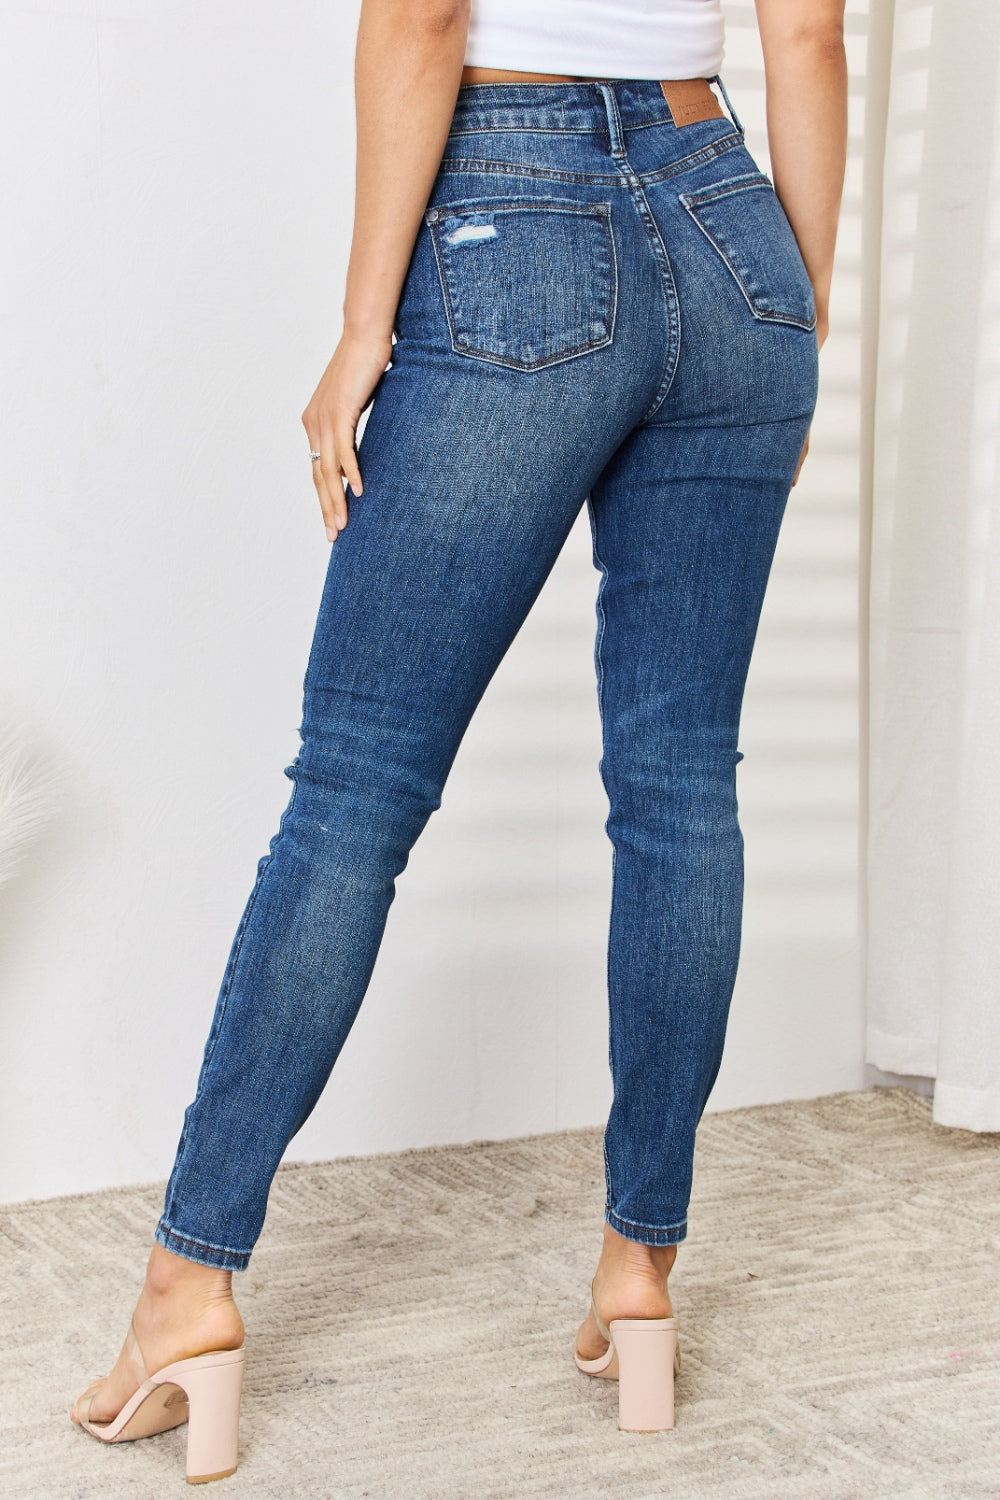 Judy Blue Slim Fit Distressed Jeans - Inspired Eye Boutique